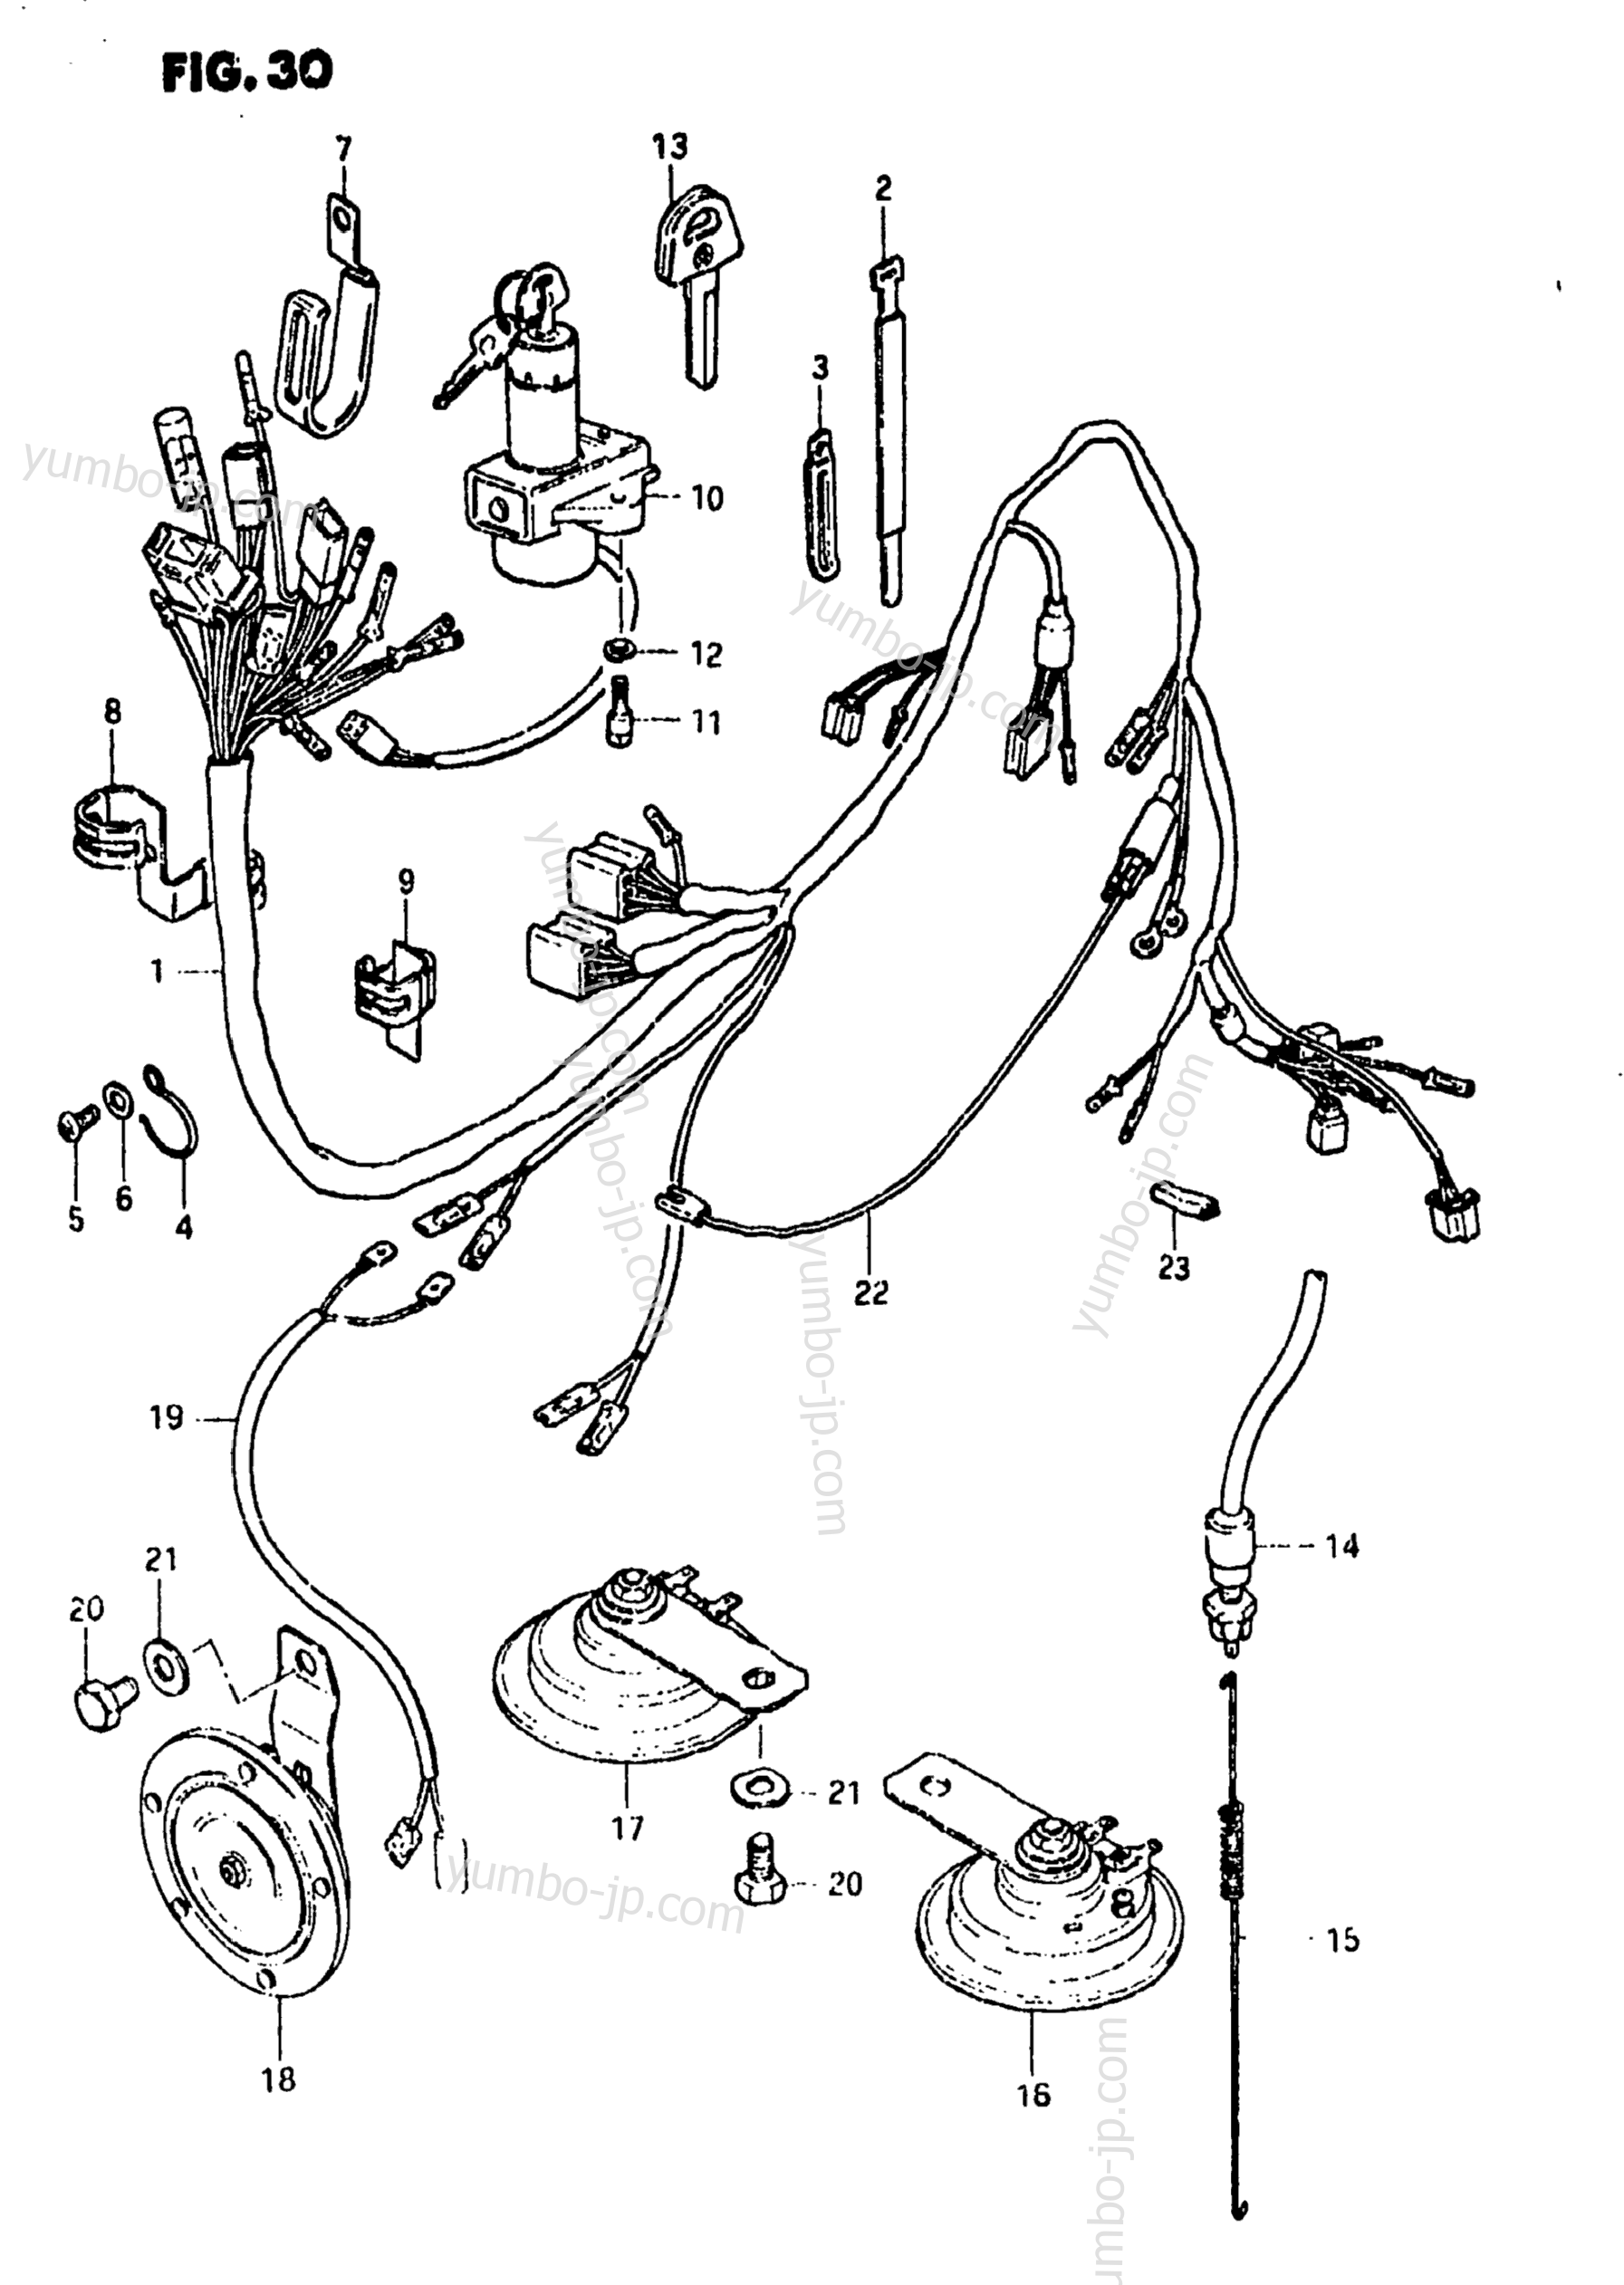 WIRING HARNESS for motorcycles SUZUKI GS850GL 1980 year